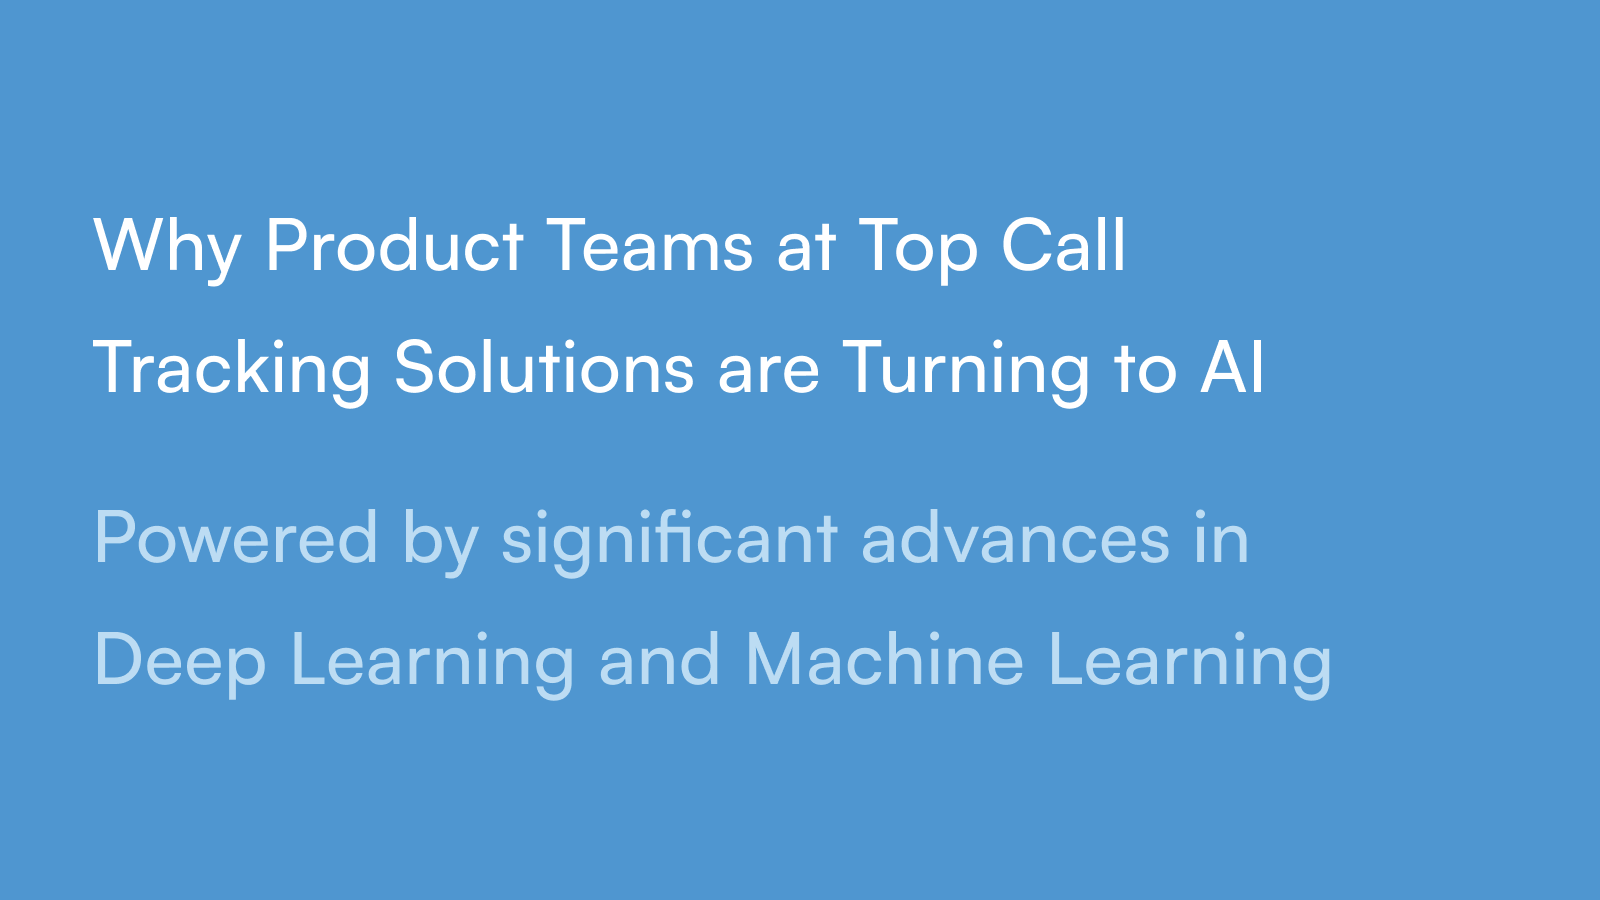 Why Product Teams at Top Call Tracking Solutions are Turning to AI